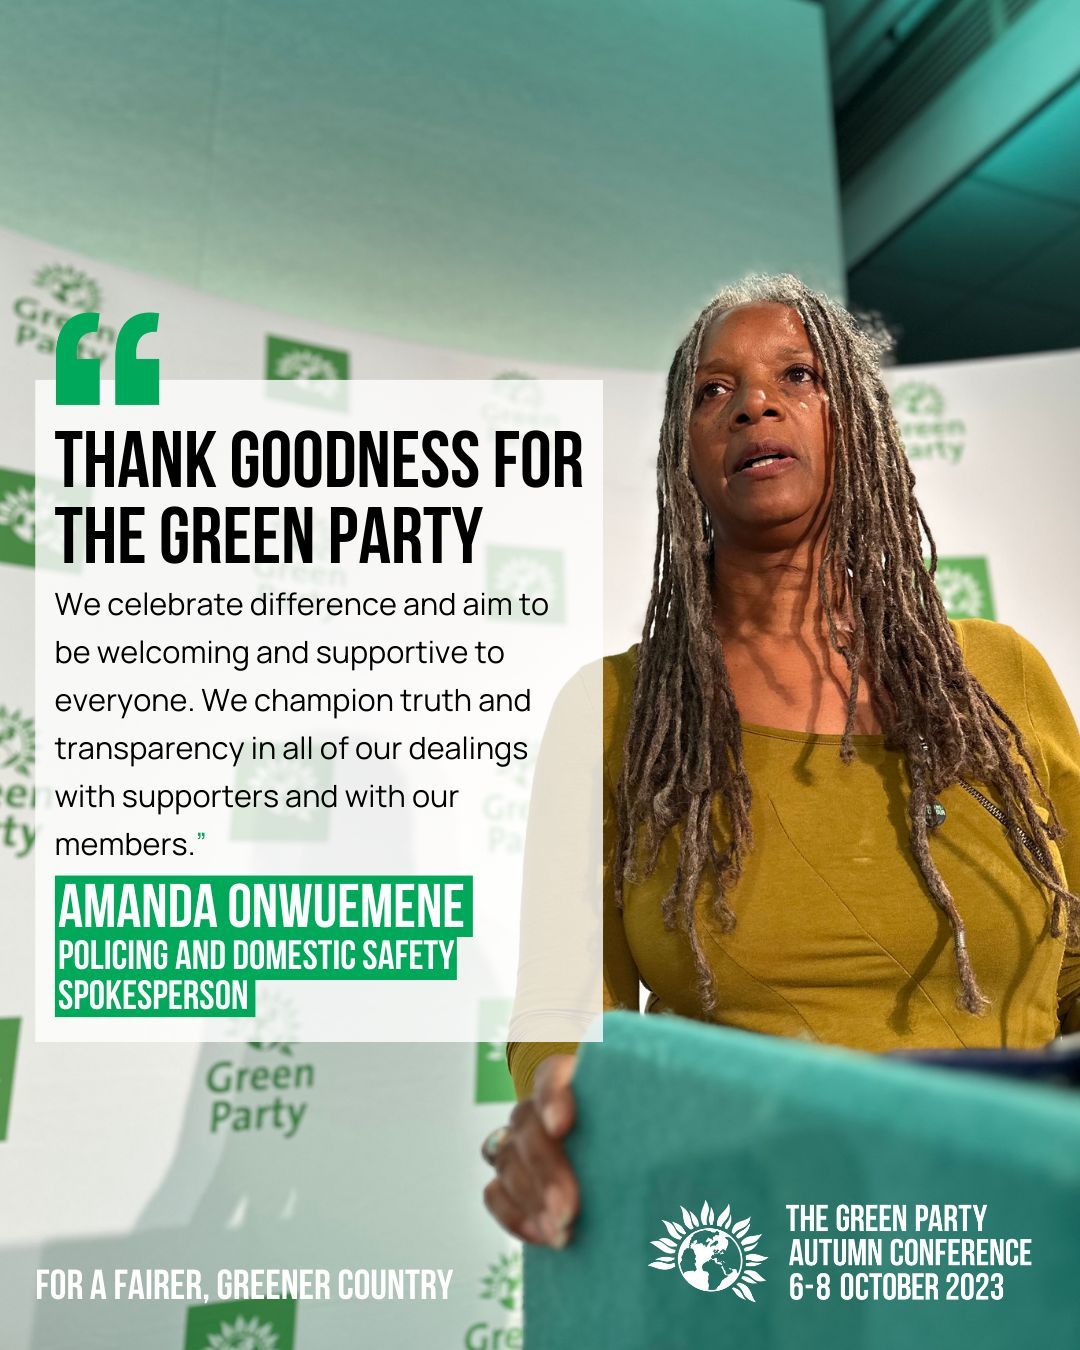 Wirral councillor Amanda Onwuemene (Birkenhead & Tranmere) received a standing ovation for her speech at this year's Green Party Conference